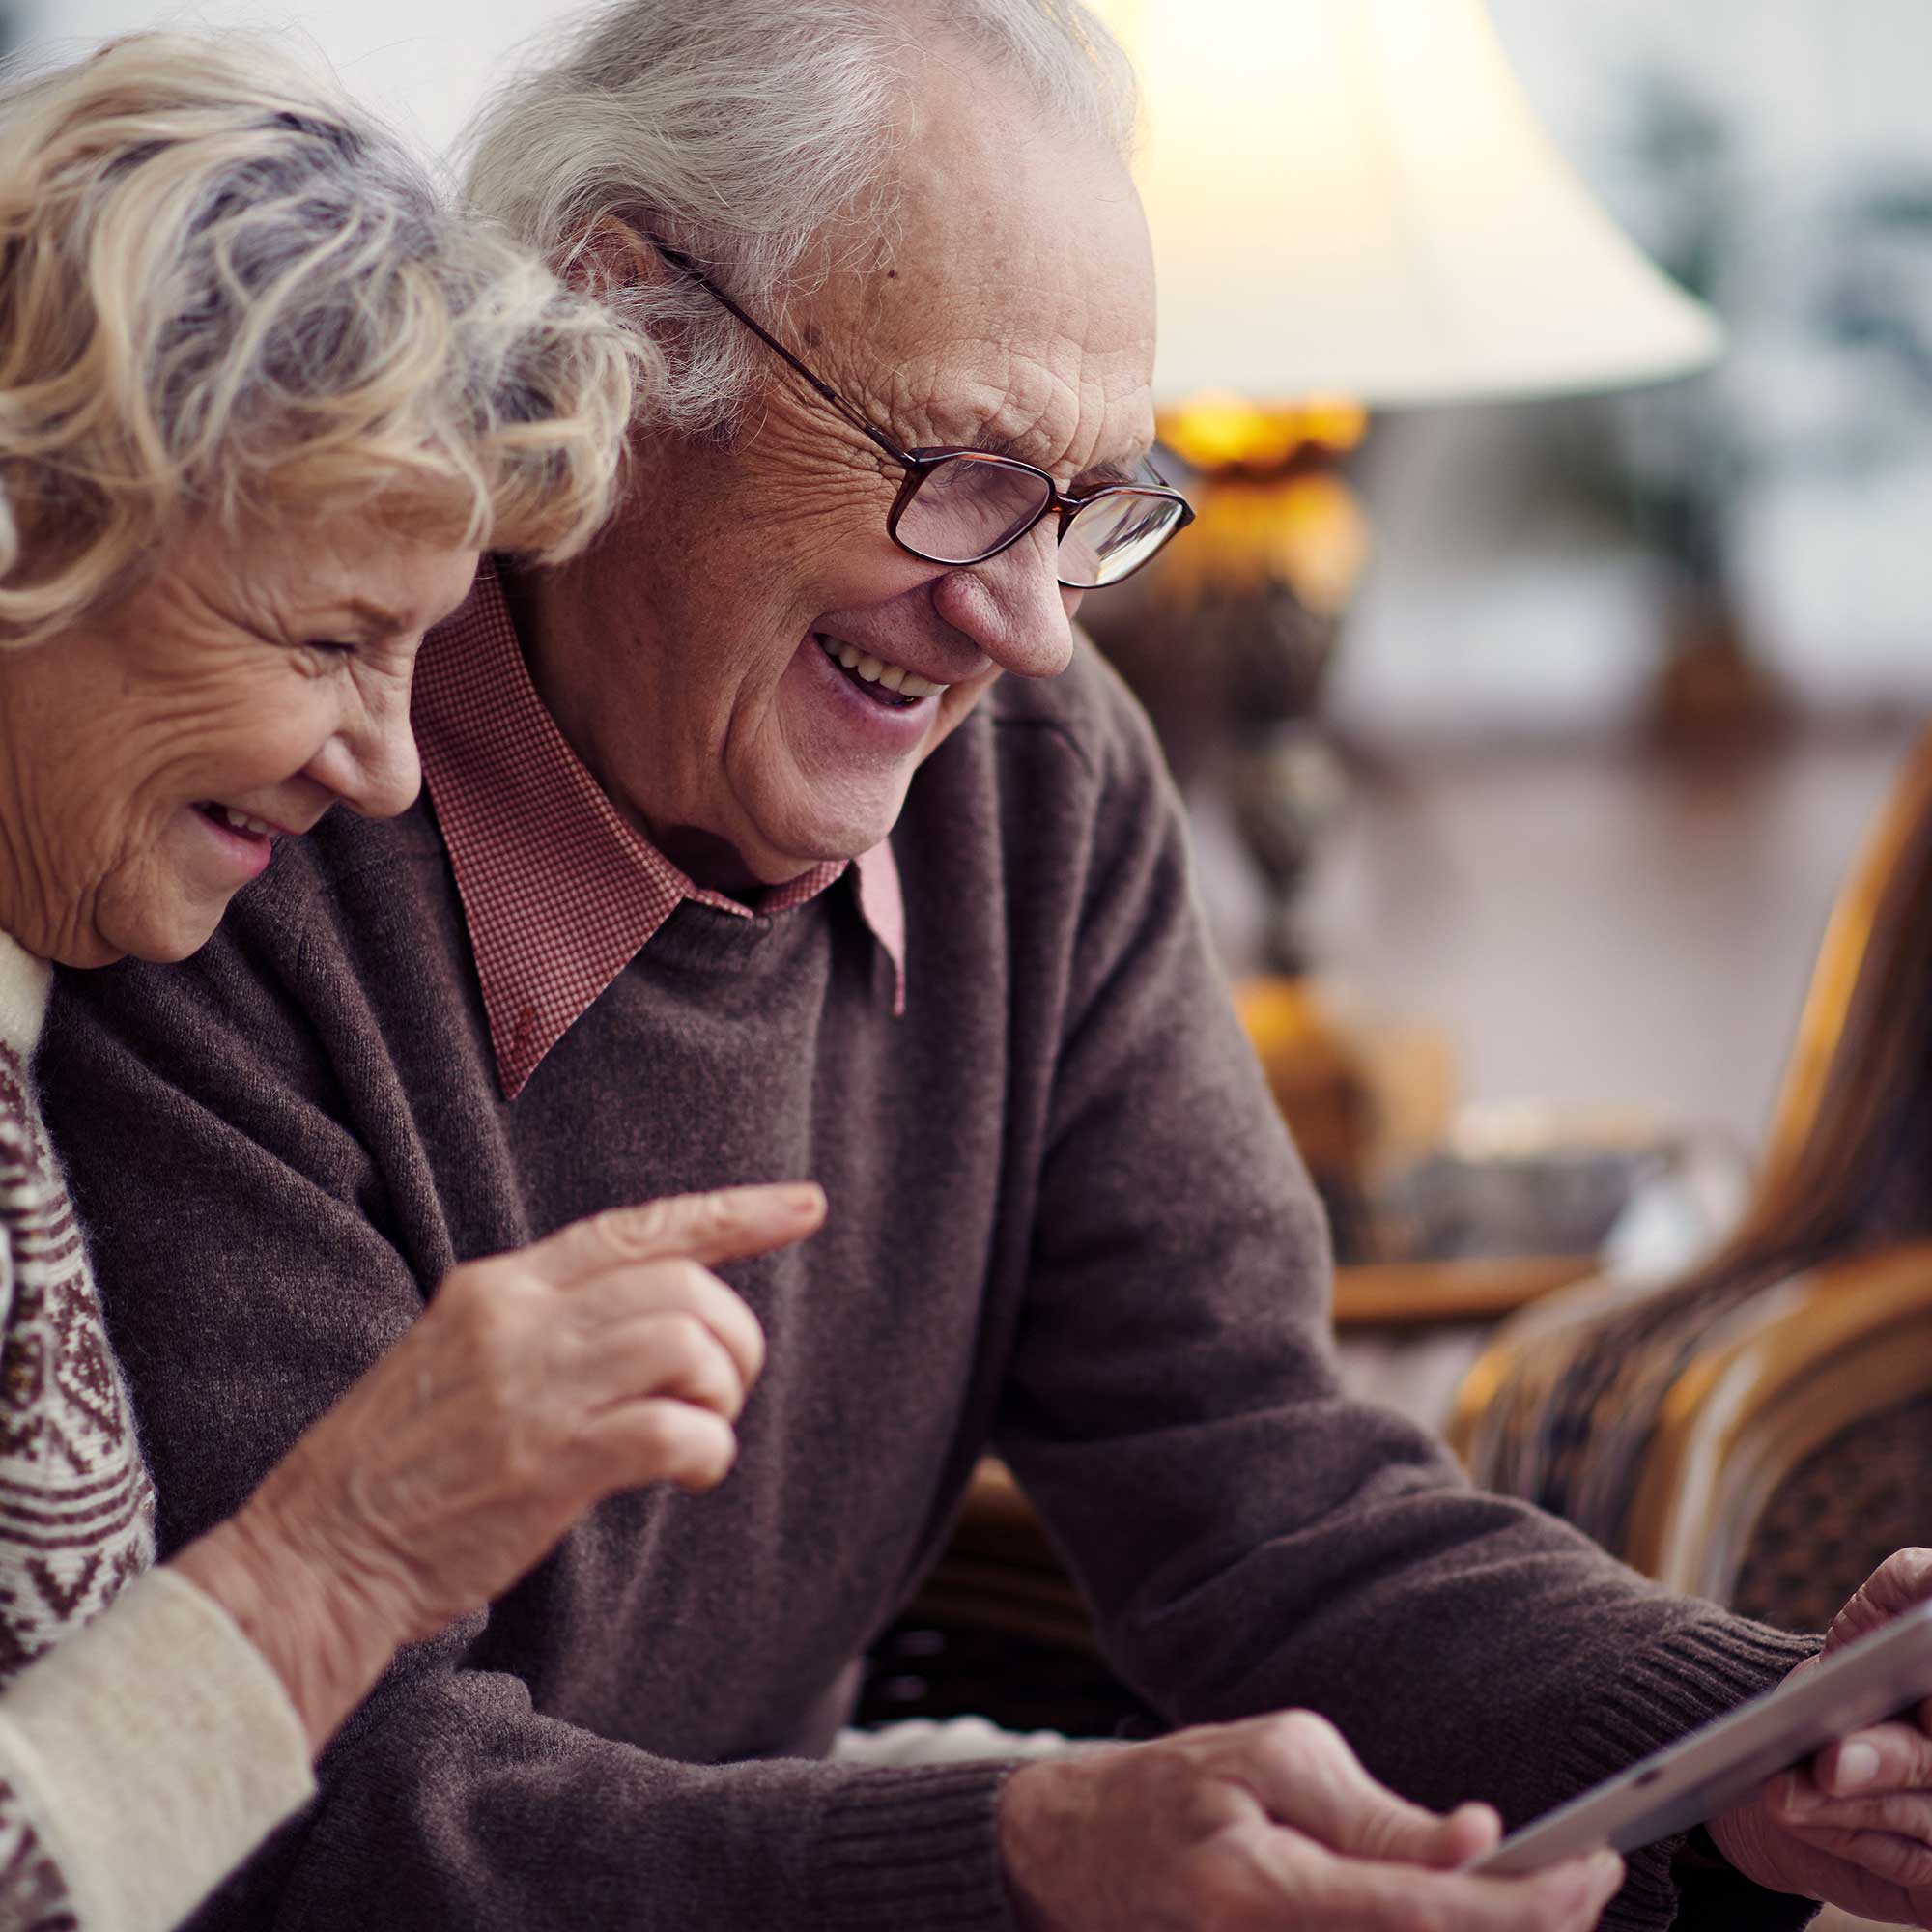 Elderly husband and wife using digital tablet at home